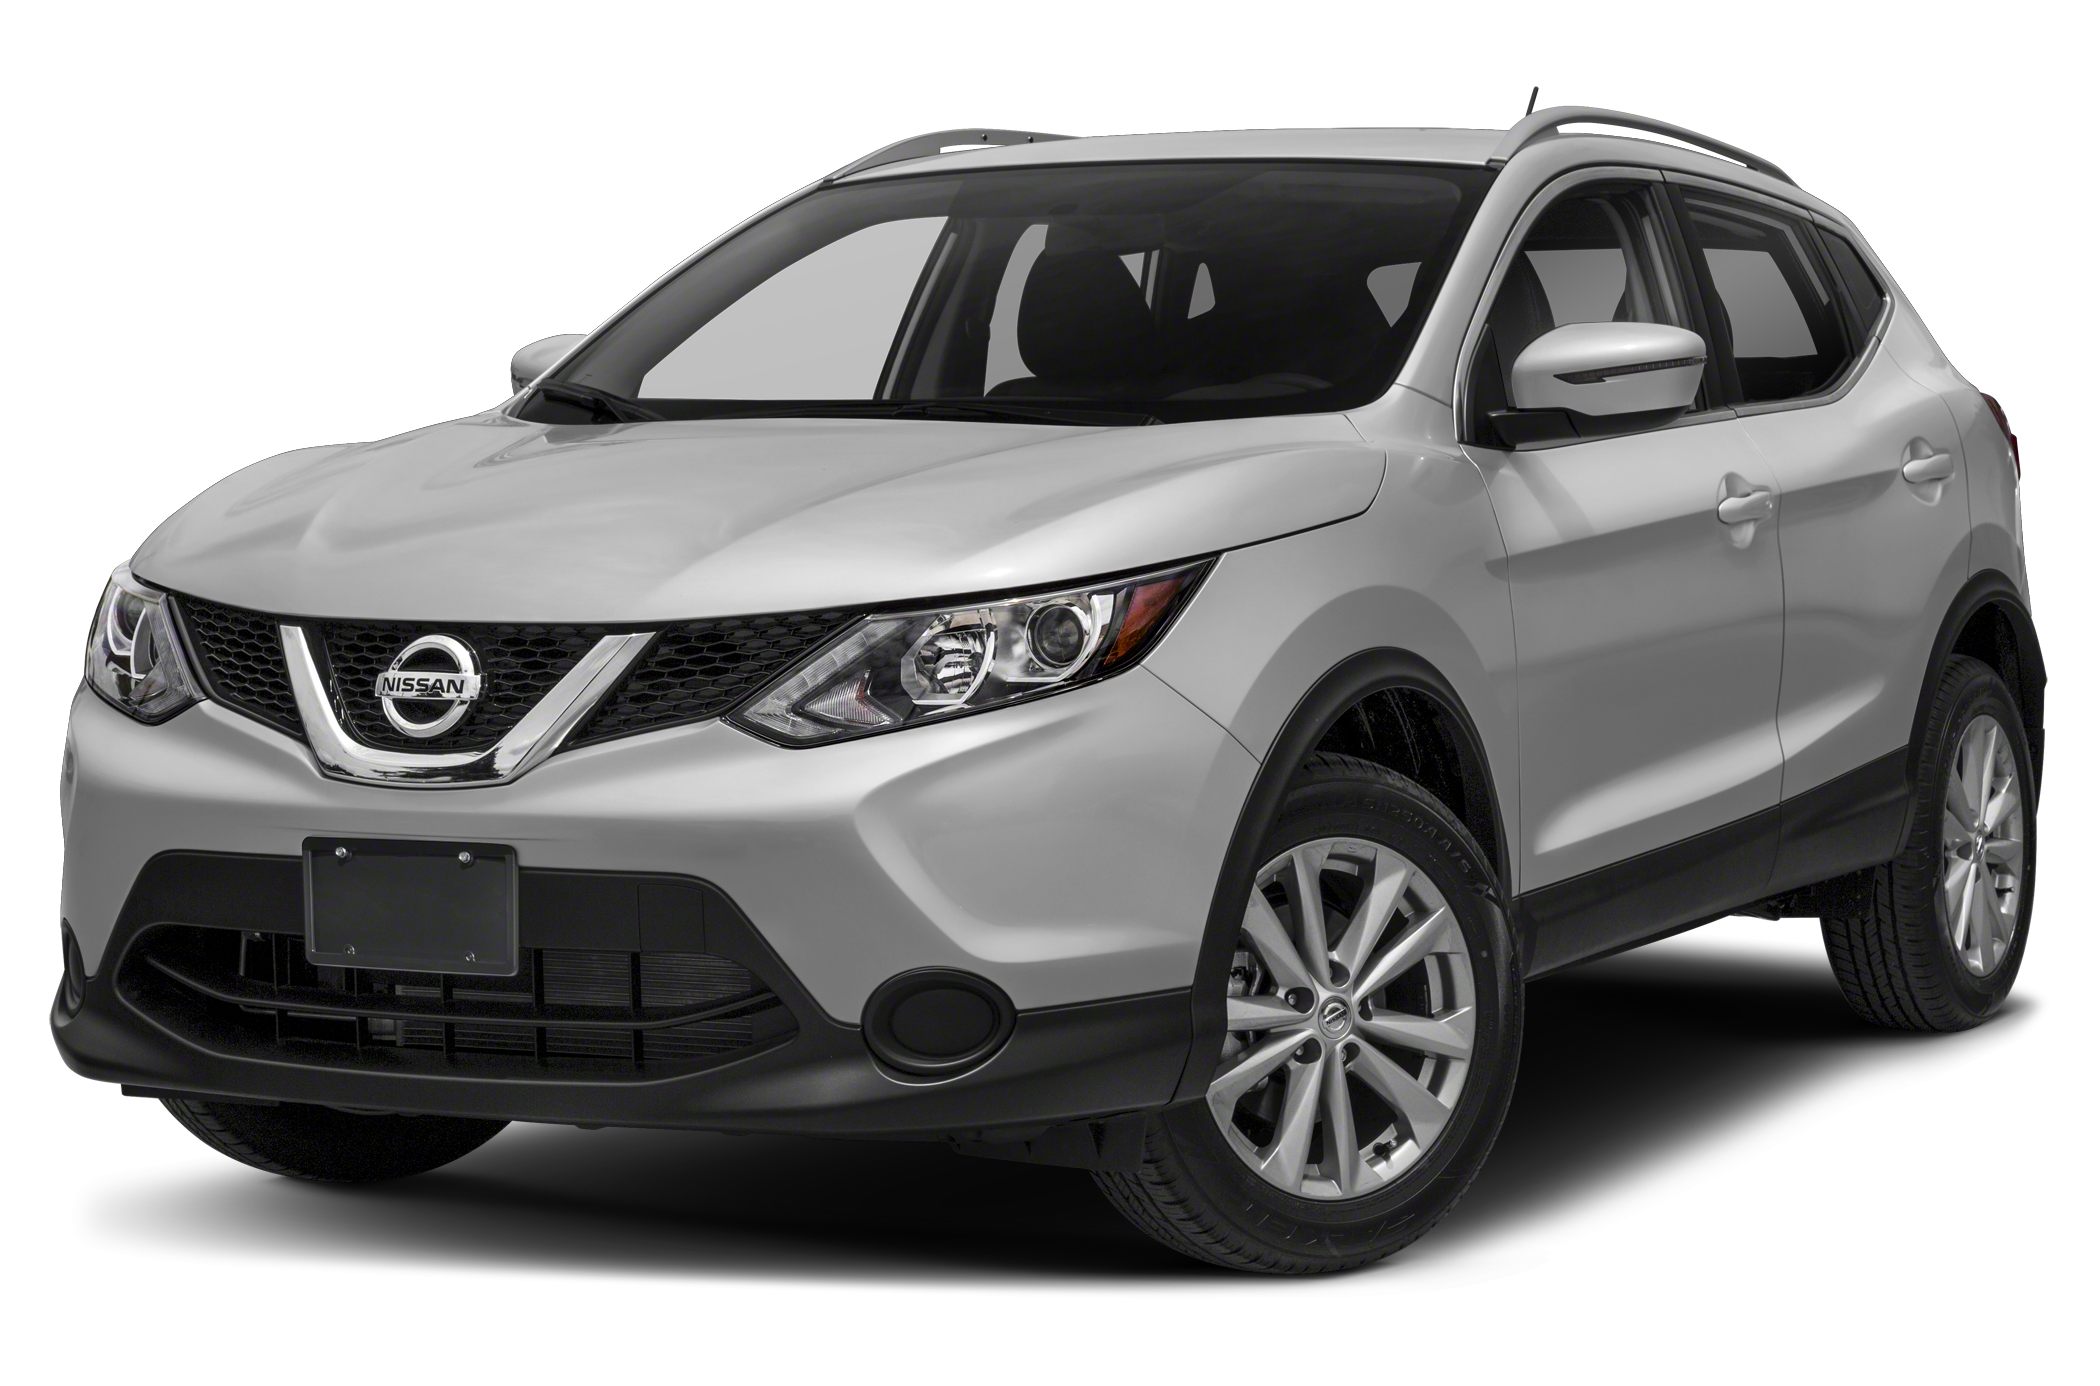 2019 Nissan Rogue Sport Review Price, specs, features and photos